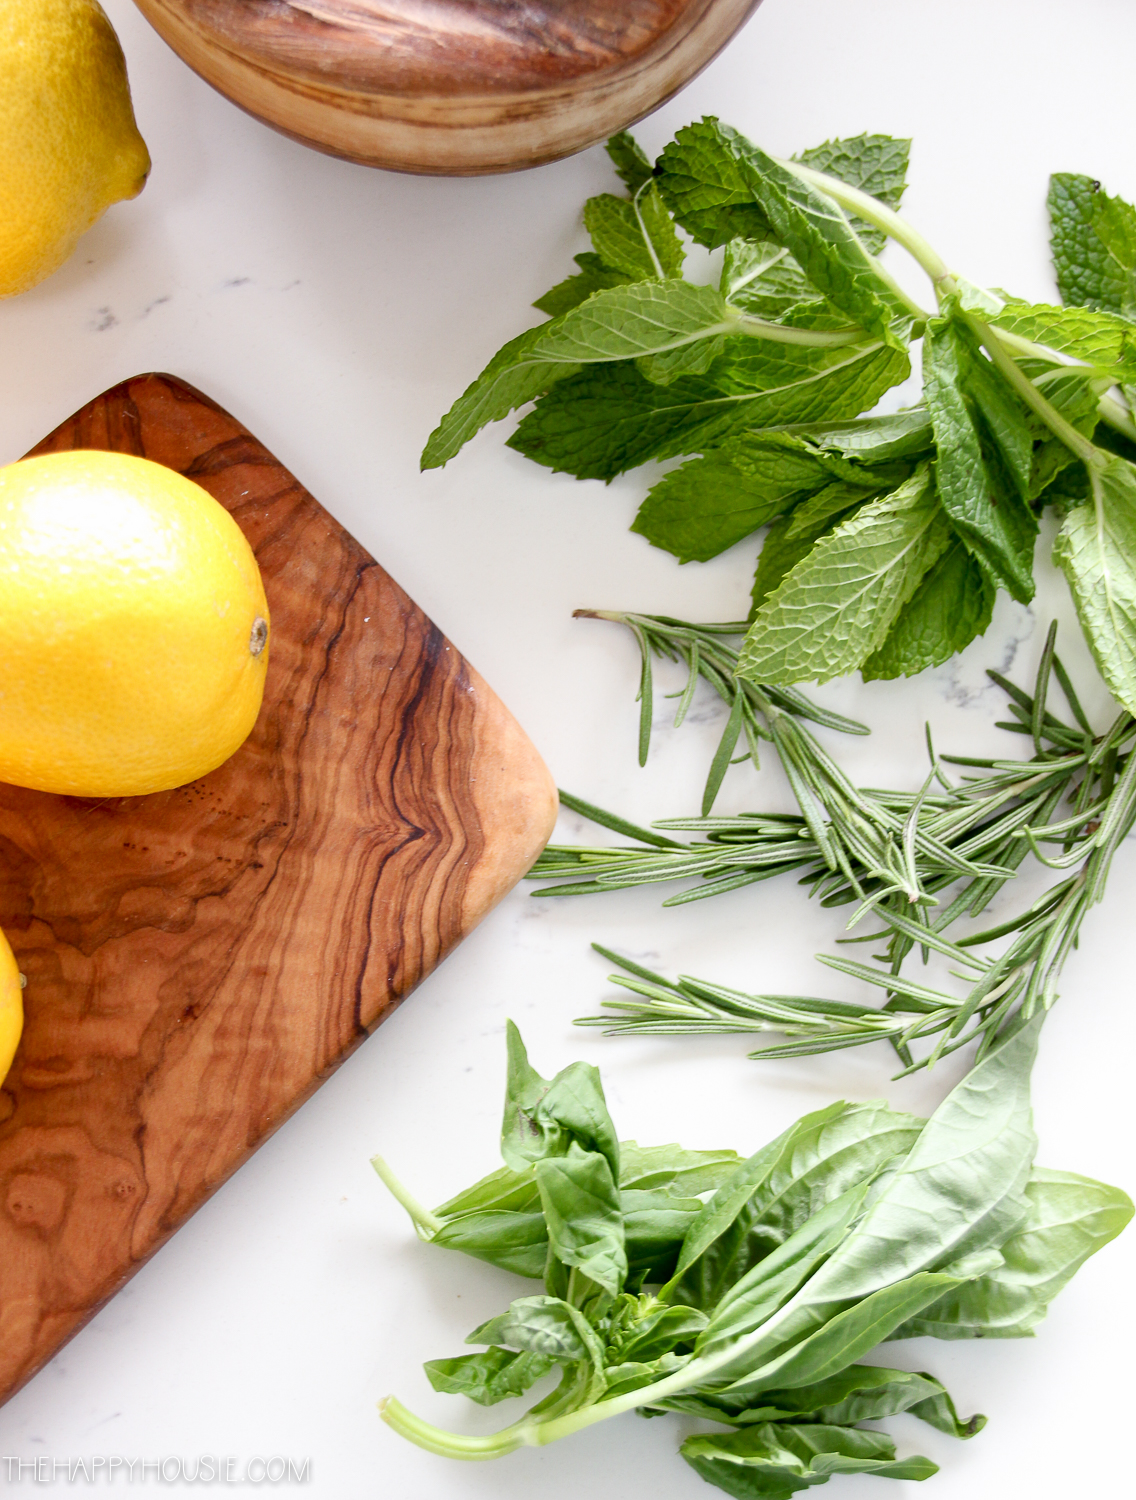 Herbs being chopped up beside the lemon.